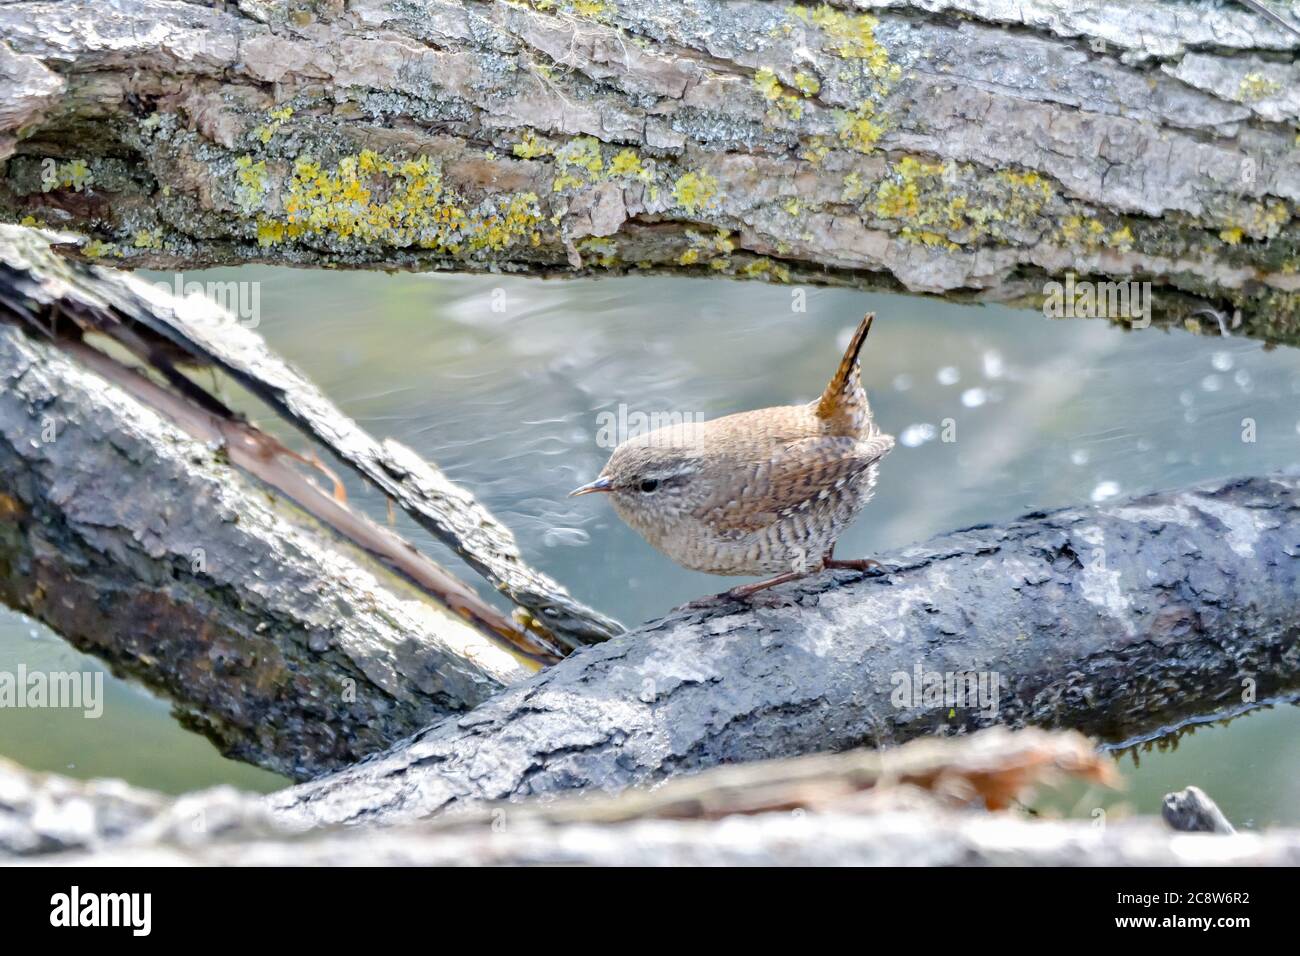 The Eurasian Wren (Troglodytes troglodytes) is one of the most beautiful singing birds in the world. Stock Photo